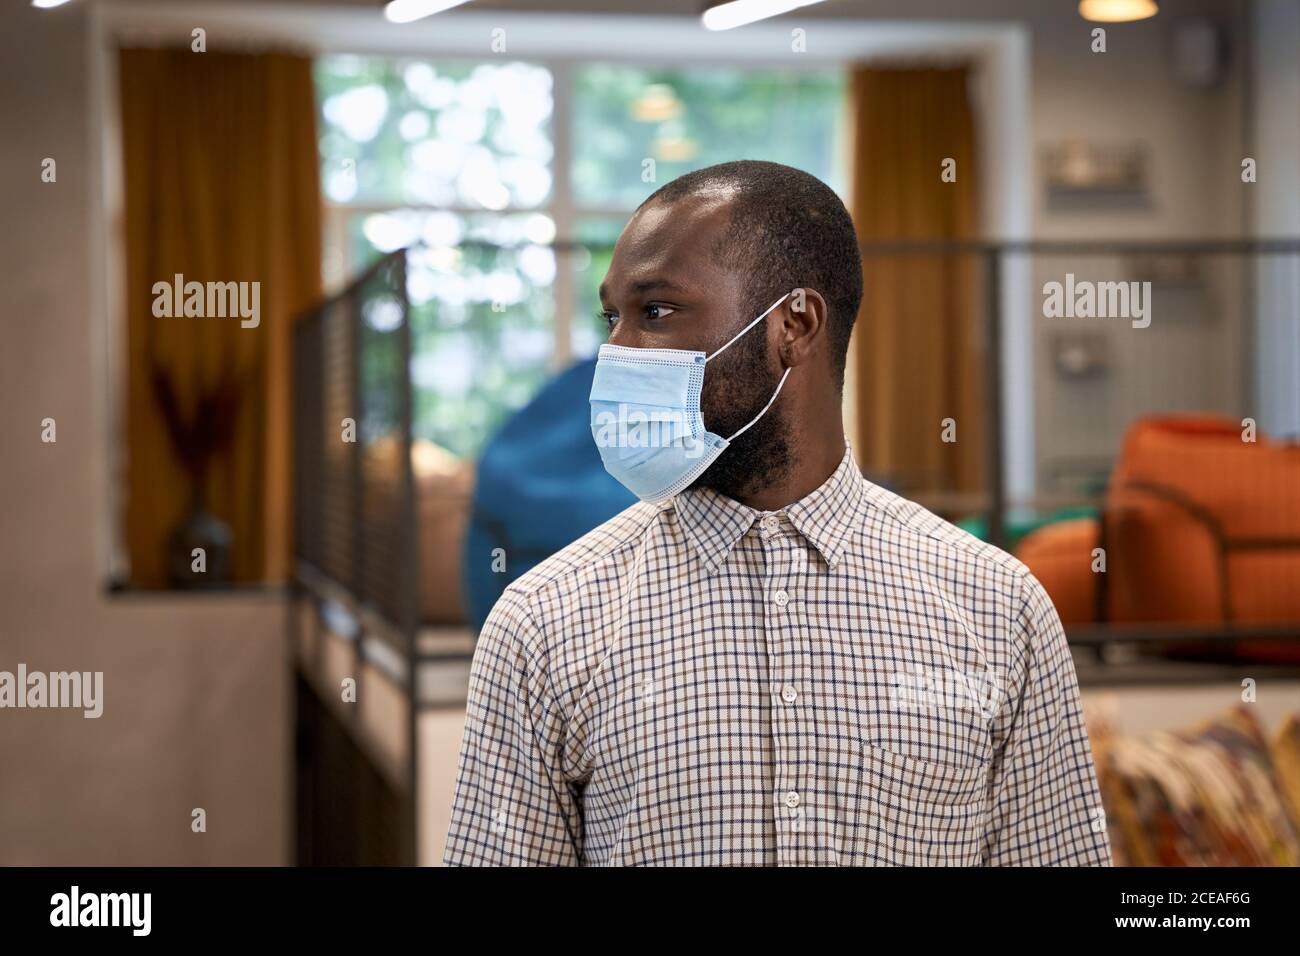 Working safely during coronavirus. Portrait of young afro american man, male office worker wearing protective face mask and looking aside, standing in Stock Photo